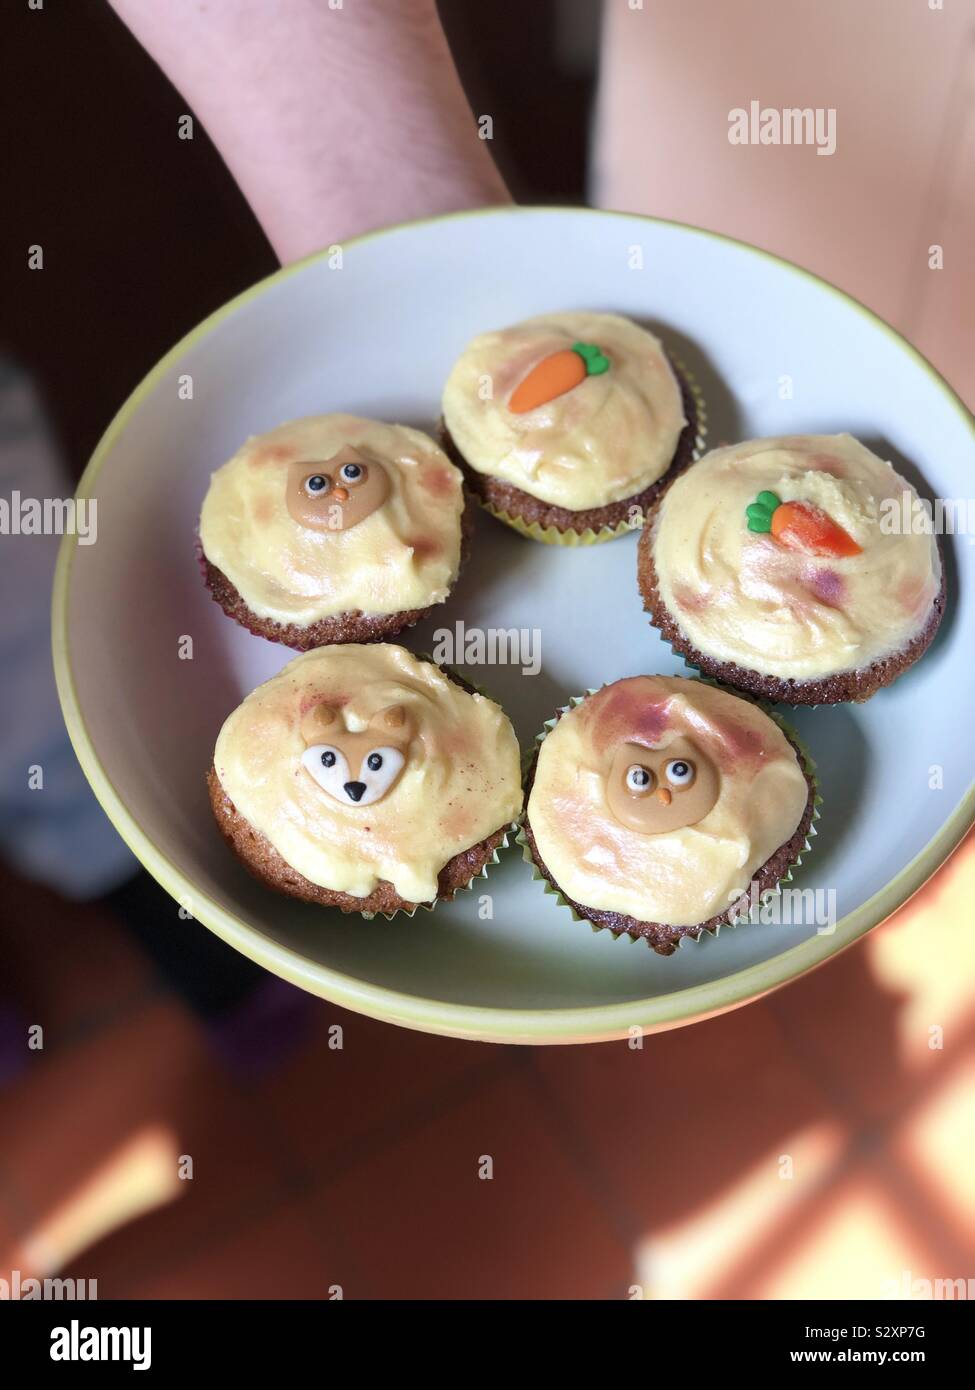 Home made fairy cakes with icing on plate. Baking with kids. Stock Photo